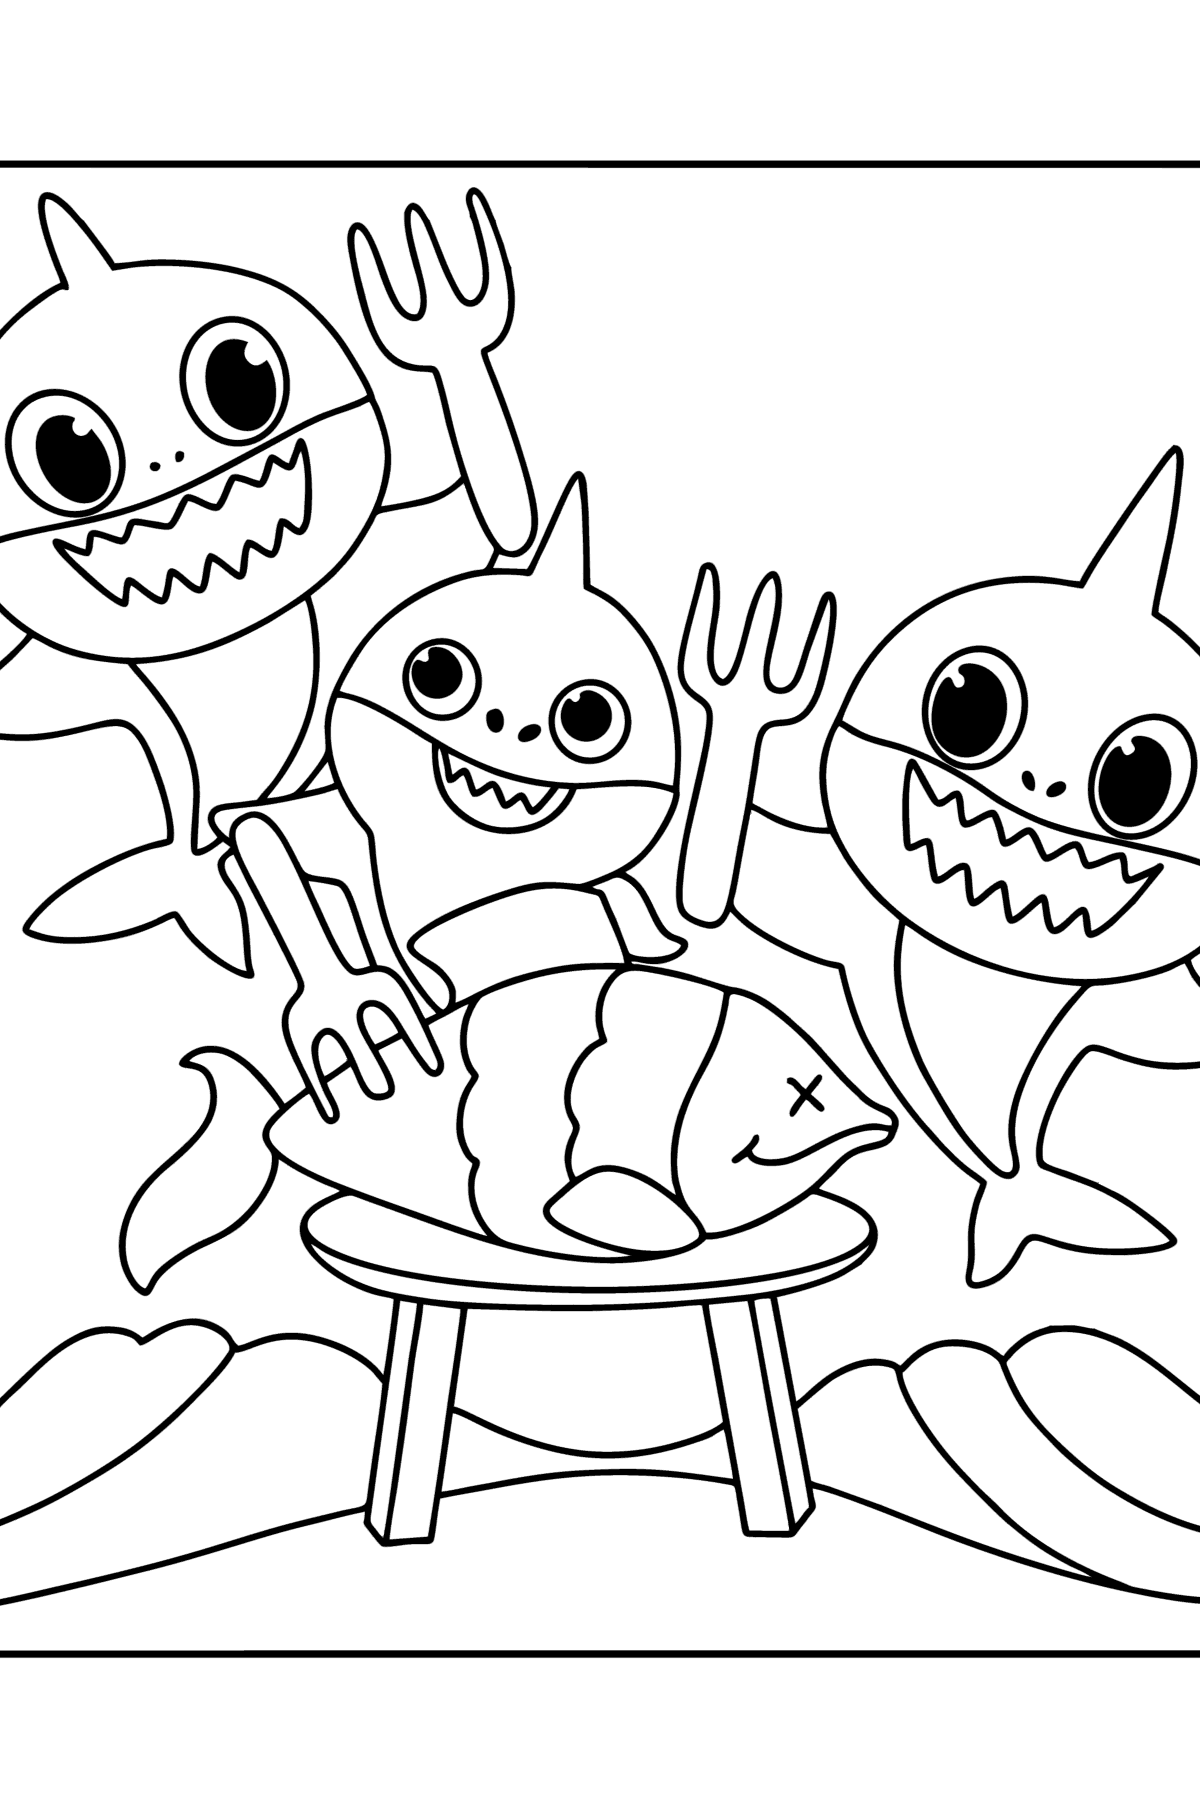 Baby shark Family coloring page ♥ Online and Print for Free